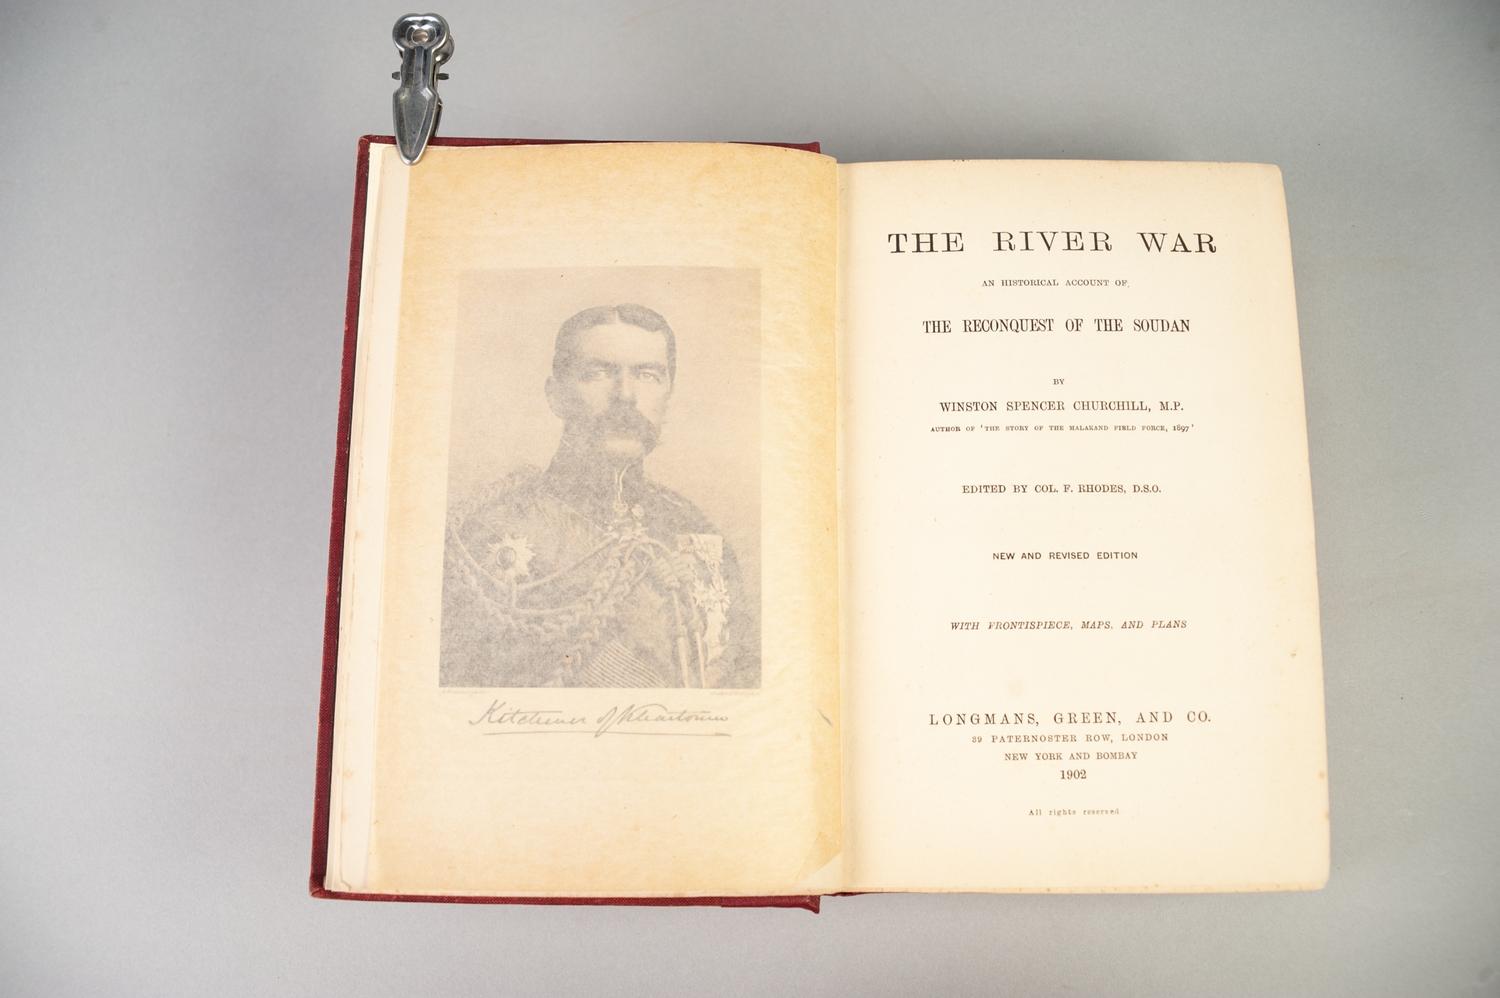 WINSTON CHURCHILL, THE RIVER WAR, published Longmans & Co 1902, 1st thus New and Revised Edition, as - Image 4 of 6